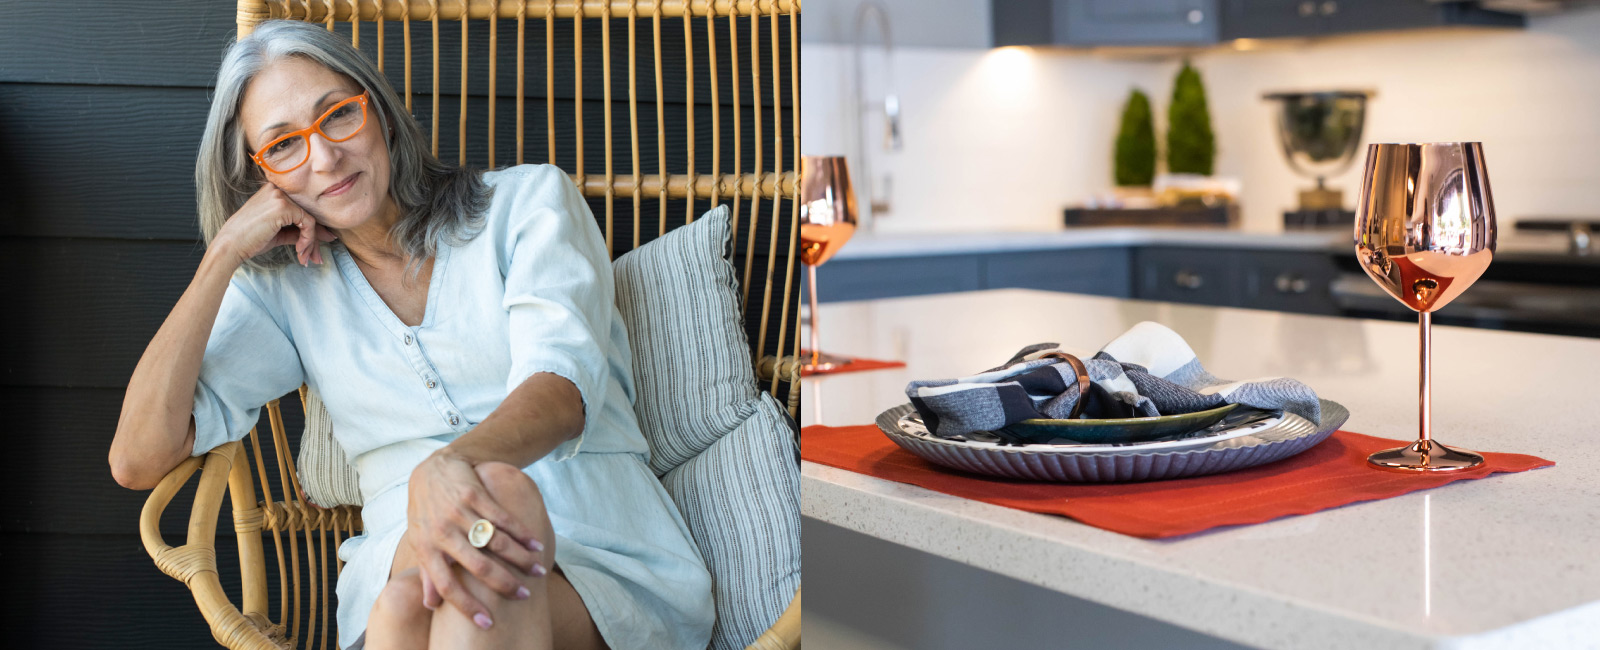 At left: woman sitting in a wicker chair. At right: close up of a place setting on a kitchen island.